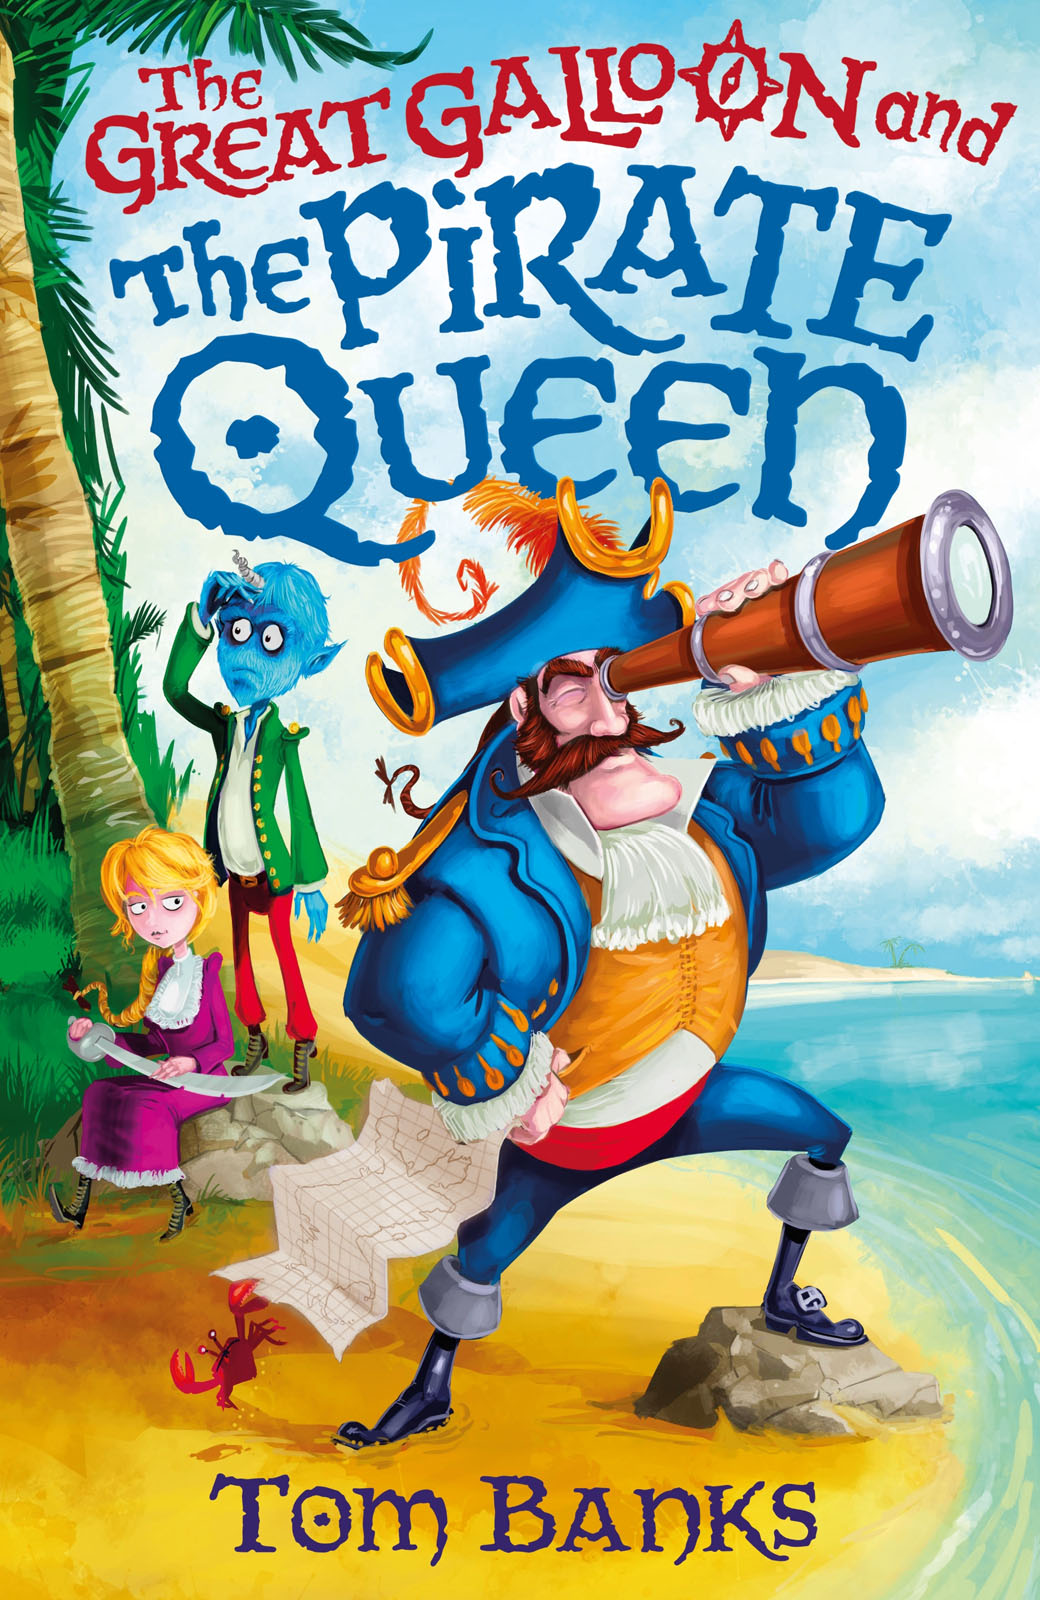 The Great Galloon and the Pirate Queen (2015) by Tom Banks